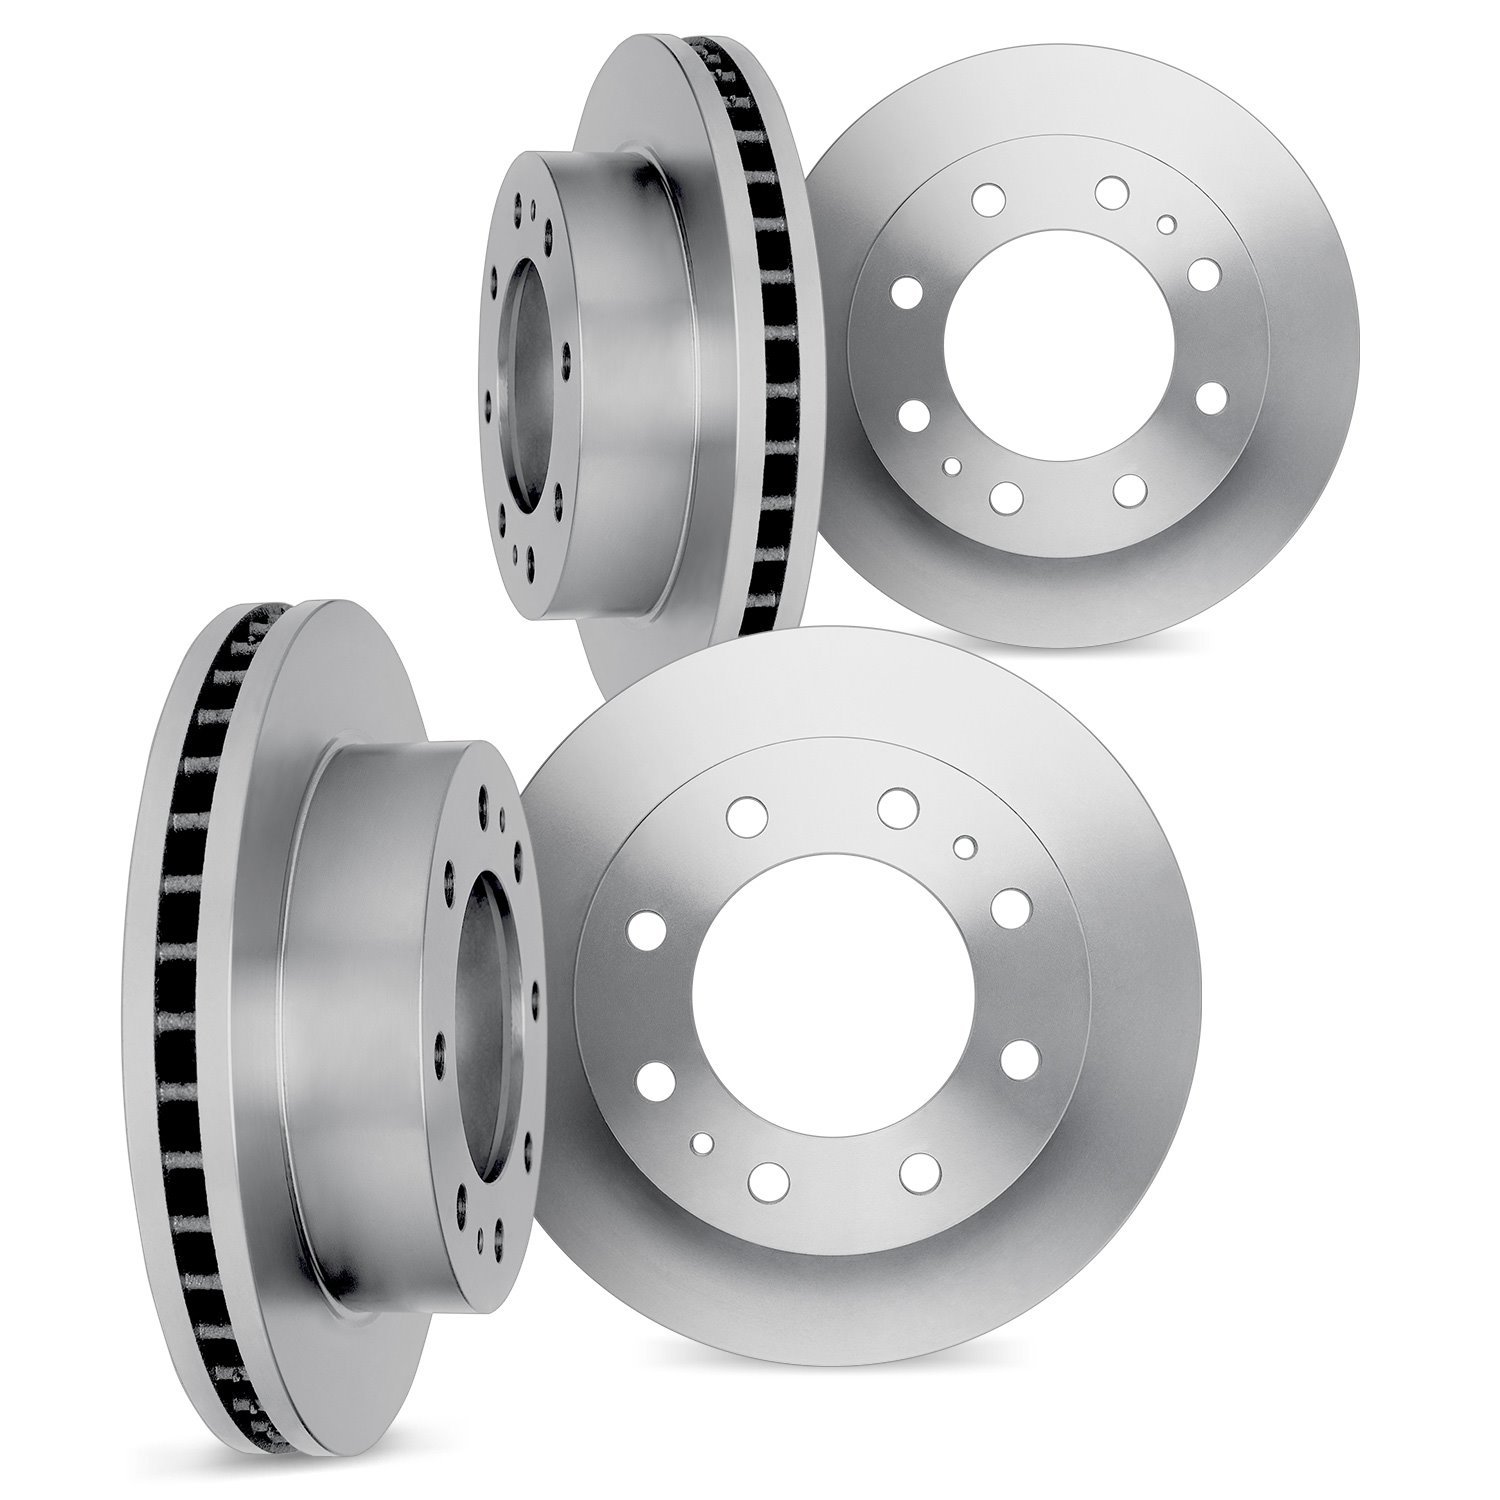 6004-54303 Brake Rotors, Fits Select Ford/Lincoln/Mercury/Mazda, Position: Front and Rear